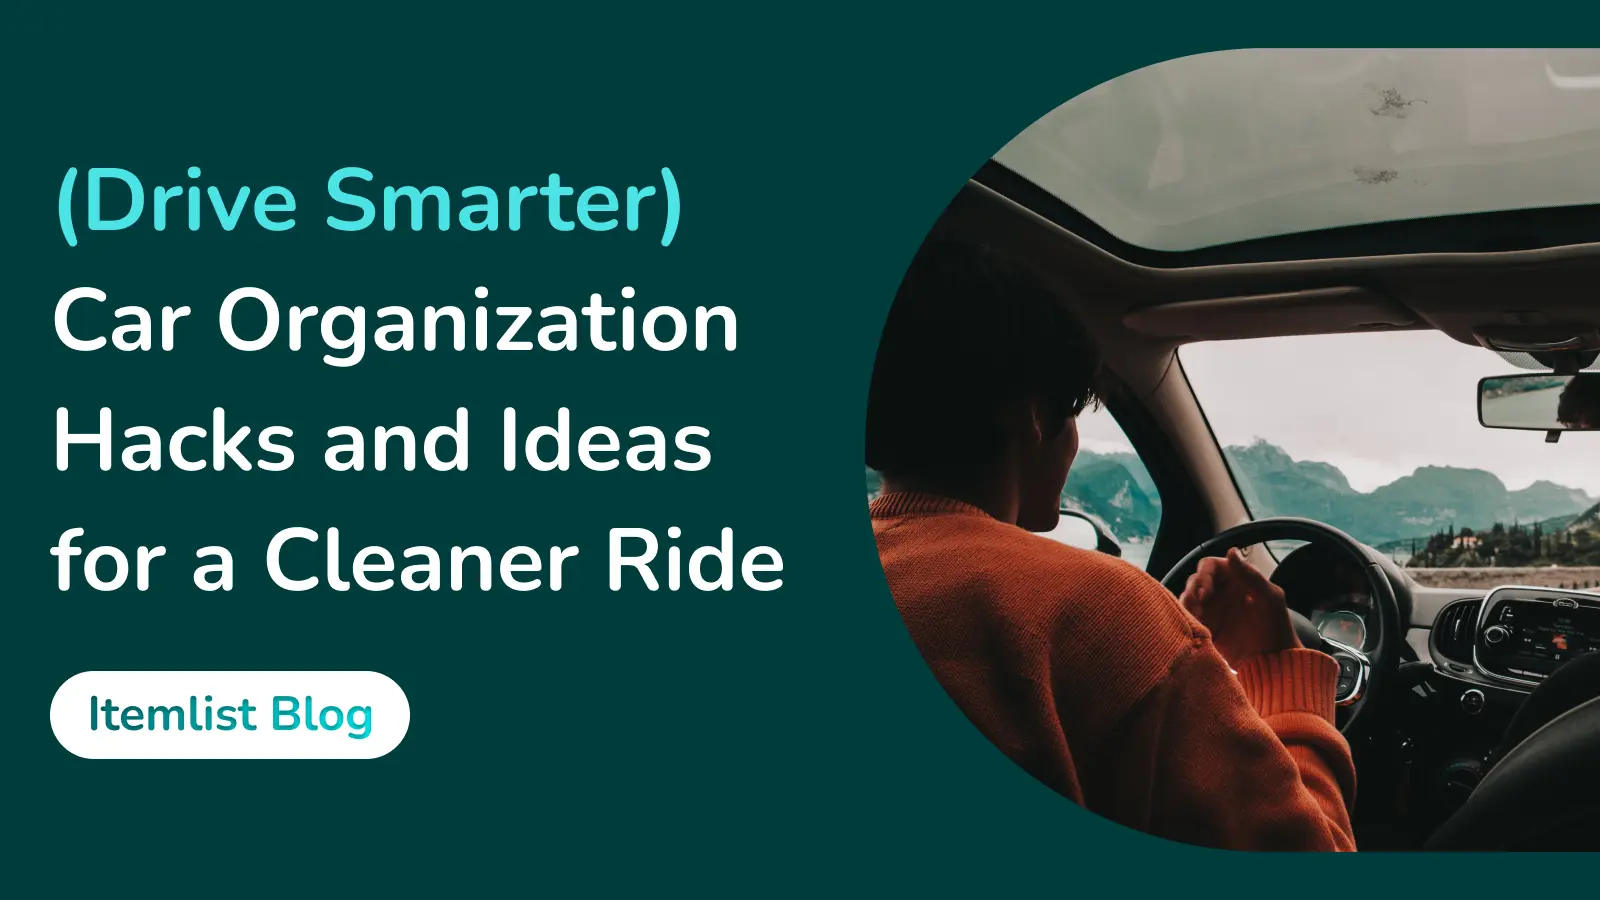 (Drive Smarter) Car Organization Hacks and Ideas for a Cleaner Ride